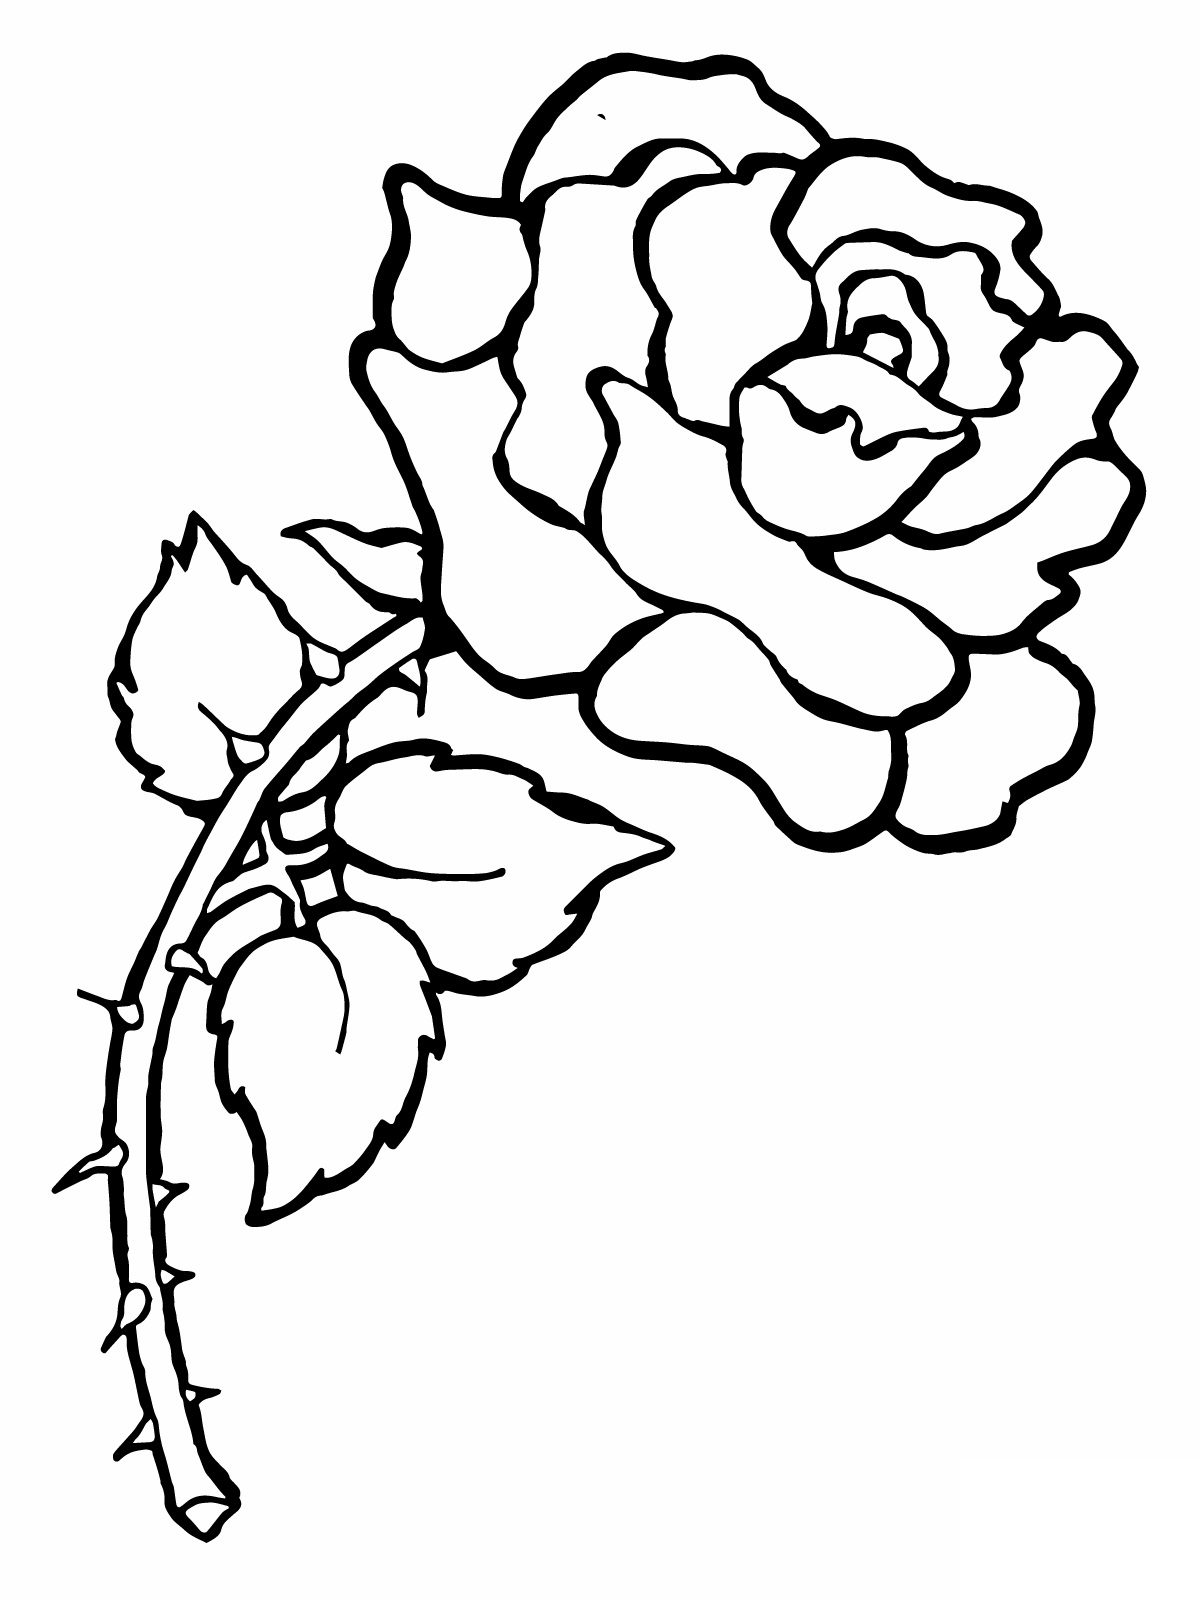 Rose Coloring Pages For Kids : Rose Coloring Pages For Kids Coloring4free Coloring4free Com